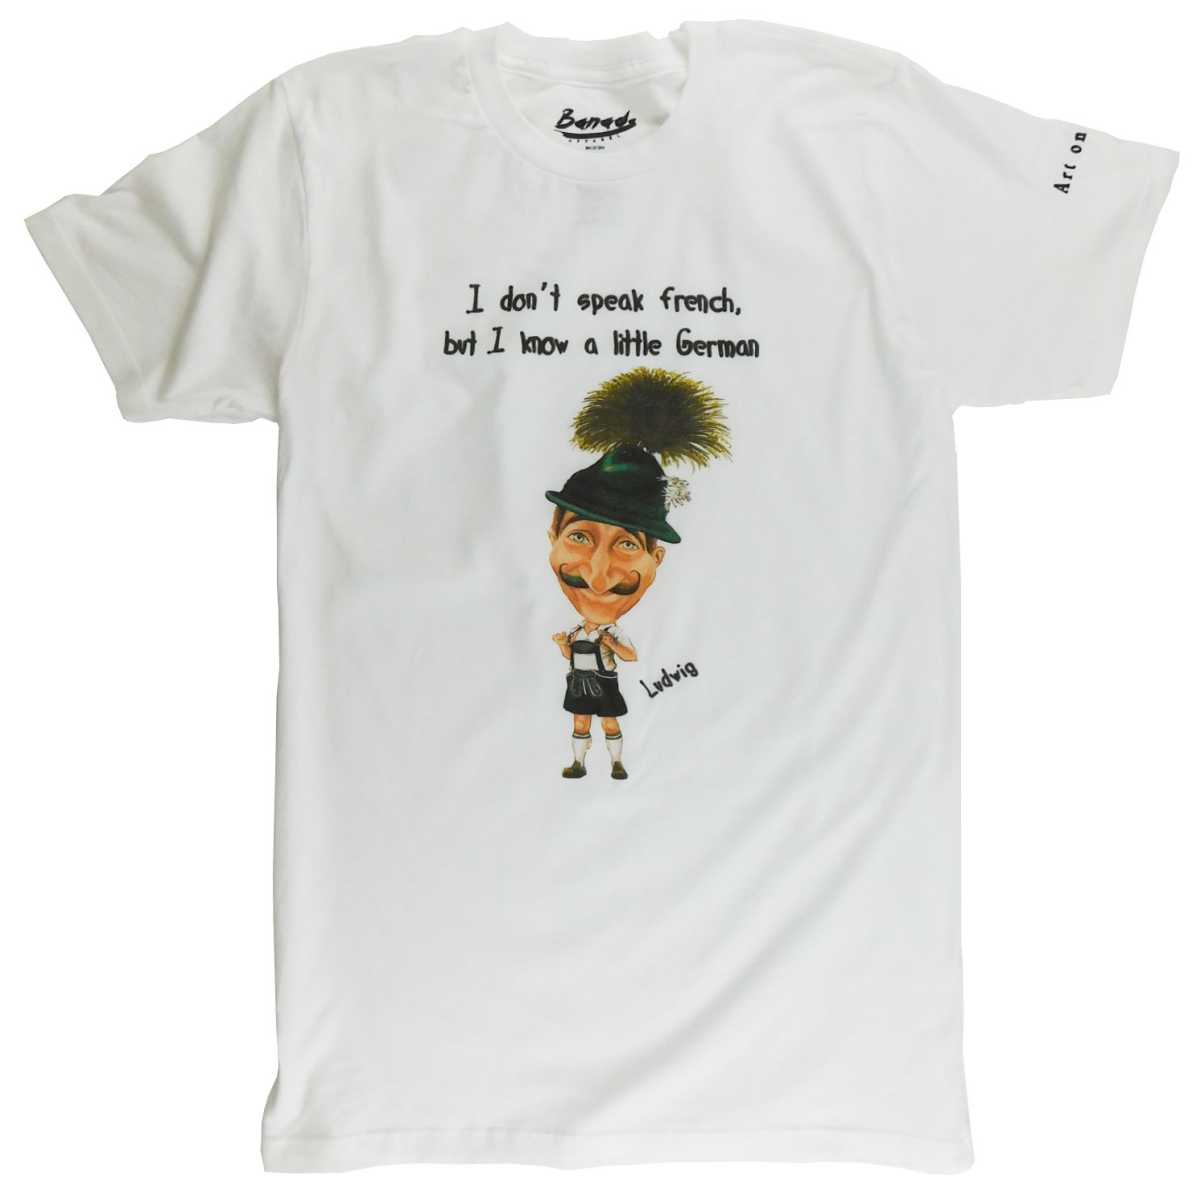 I don’t speak French, but I know a little German T-Shirt